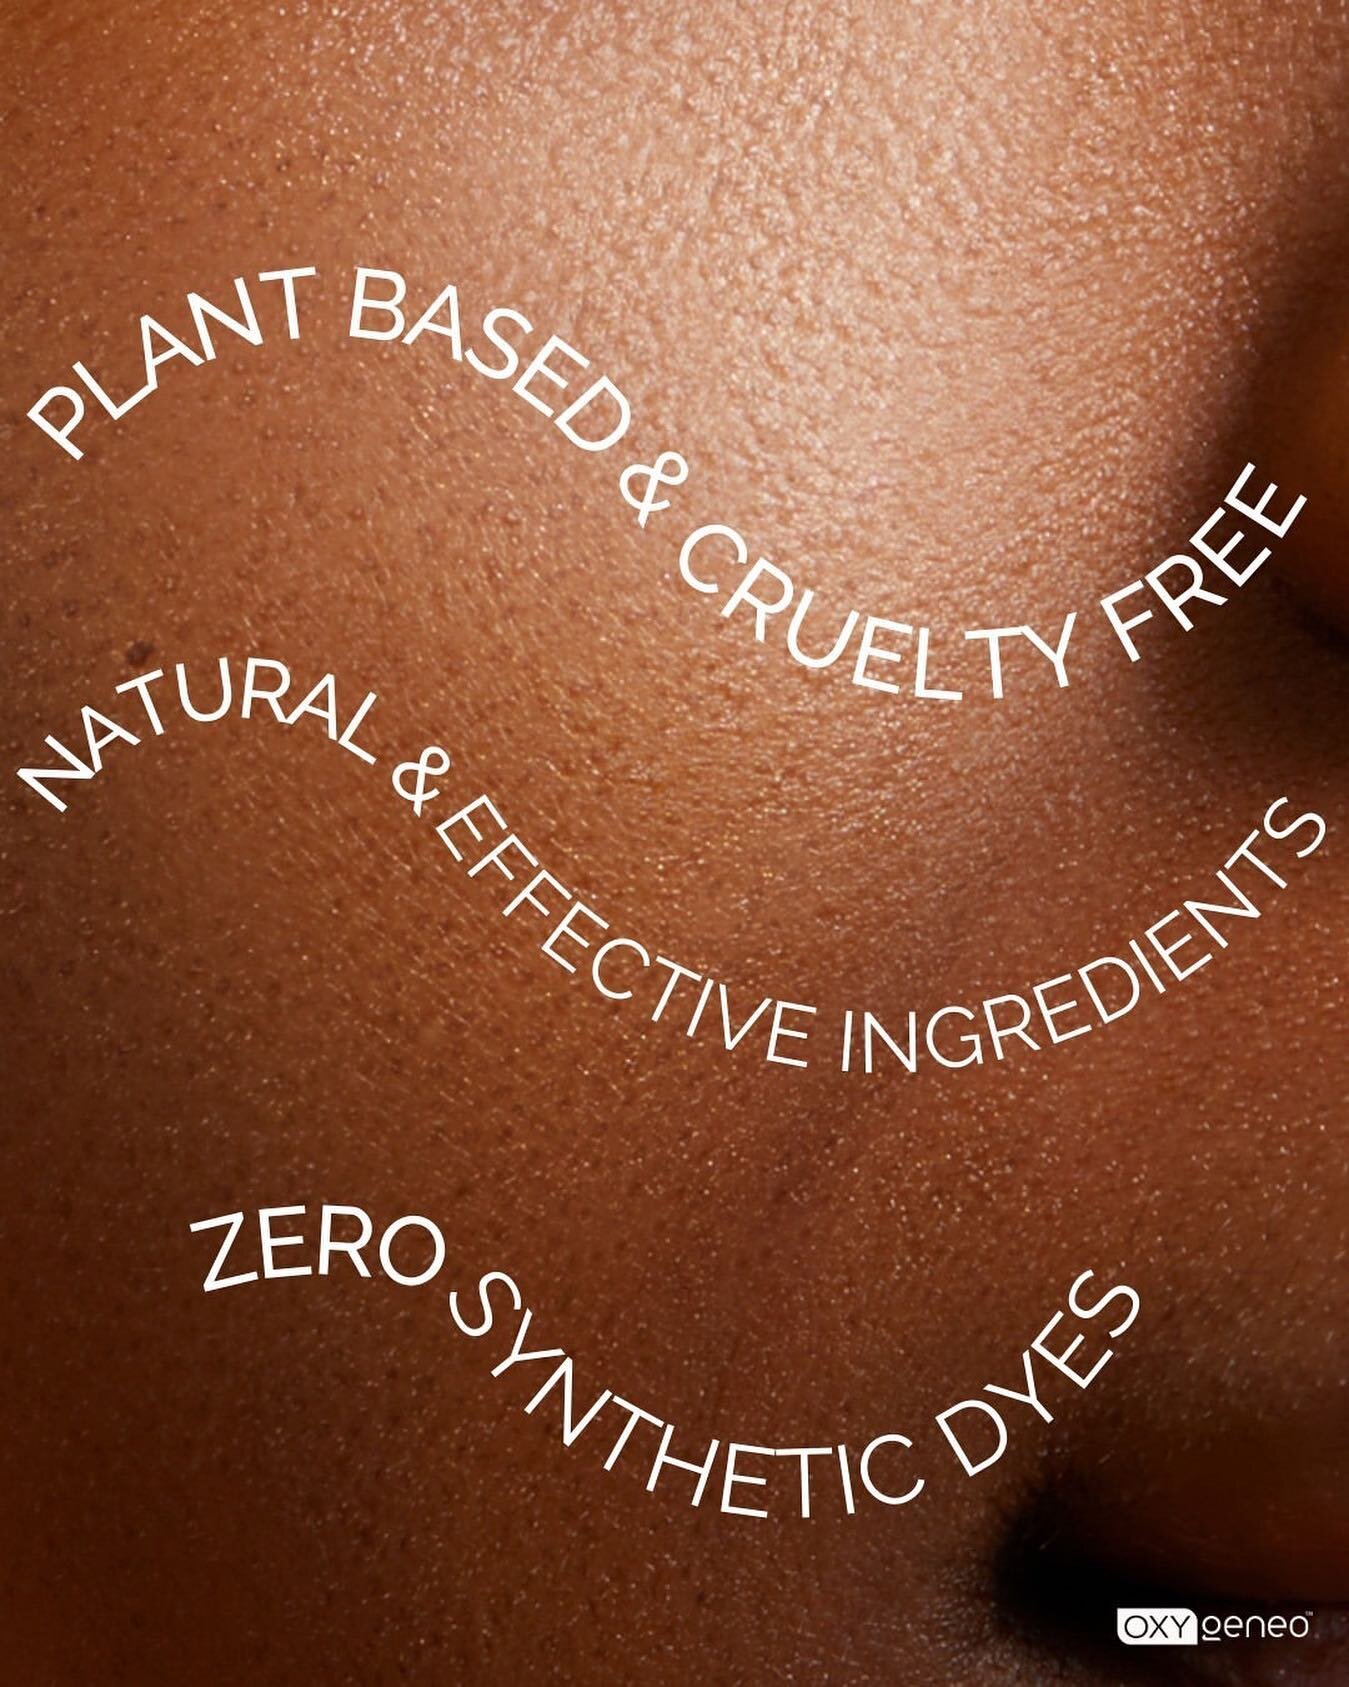 Plan your monthly maintenance, guilt-free! OxyGeneo&trade; is 100% cruelty-free and plant-based! None of our products have ever been and will never be tested on animals, and our OxyPods&trade; help you achieve your dream skin using natural, vitamin-r